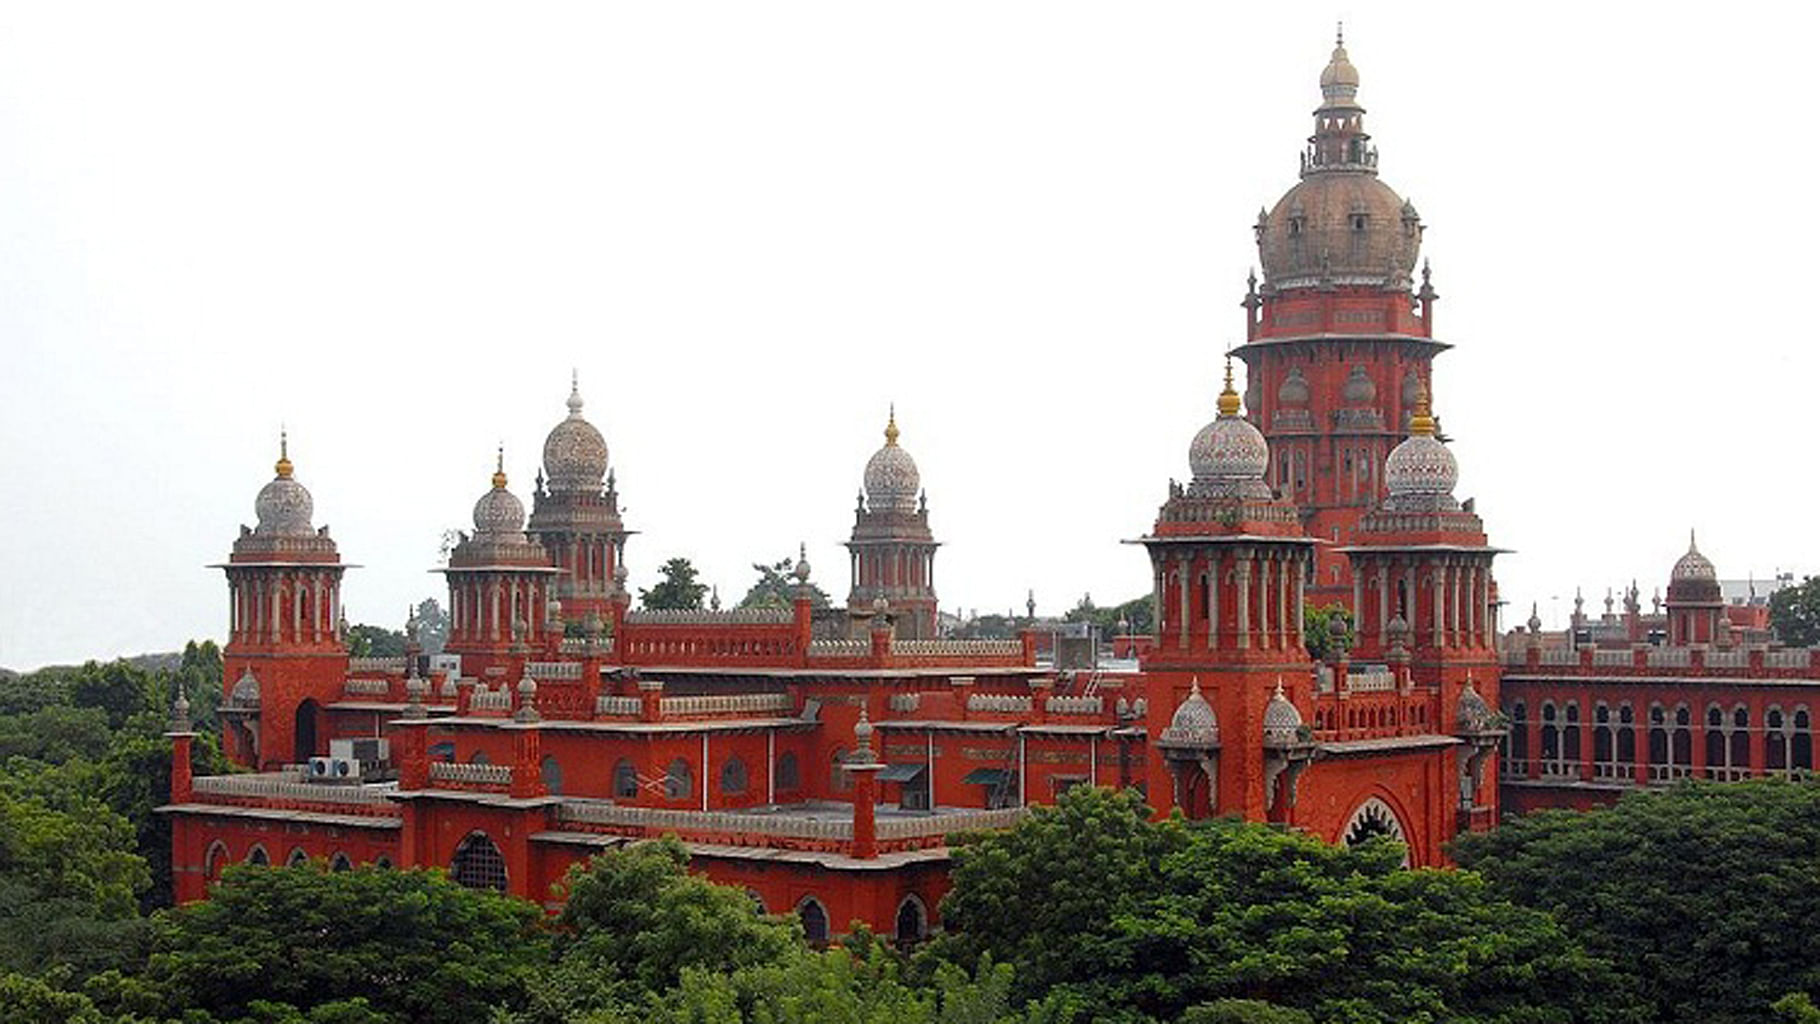 DMK has approached the Madras High Court, seeking to nullify the constitutional amendment.